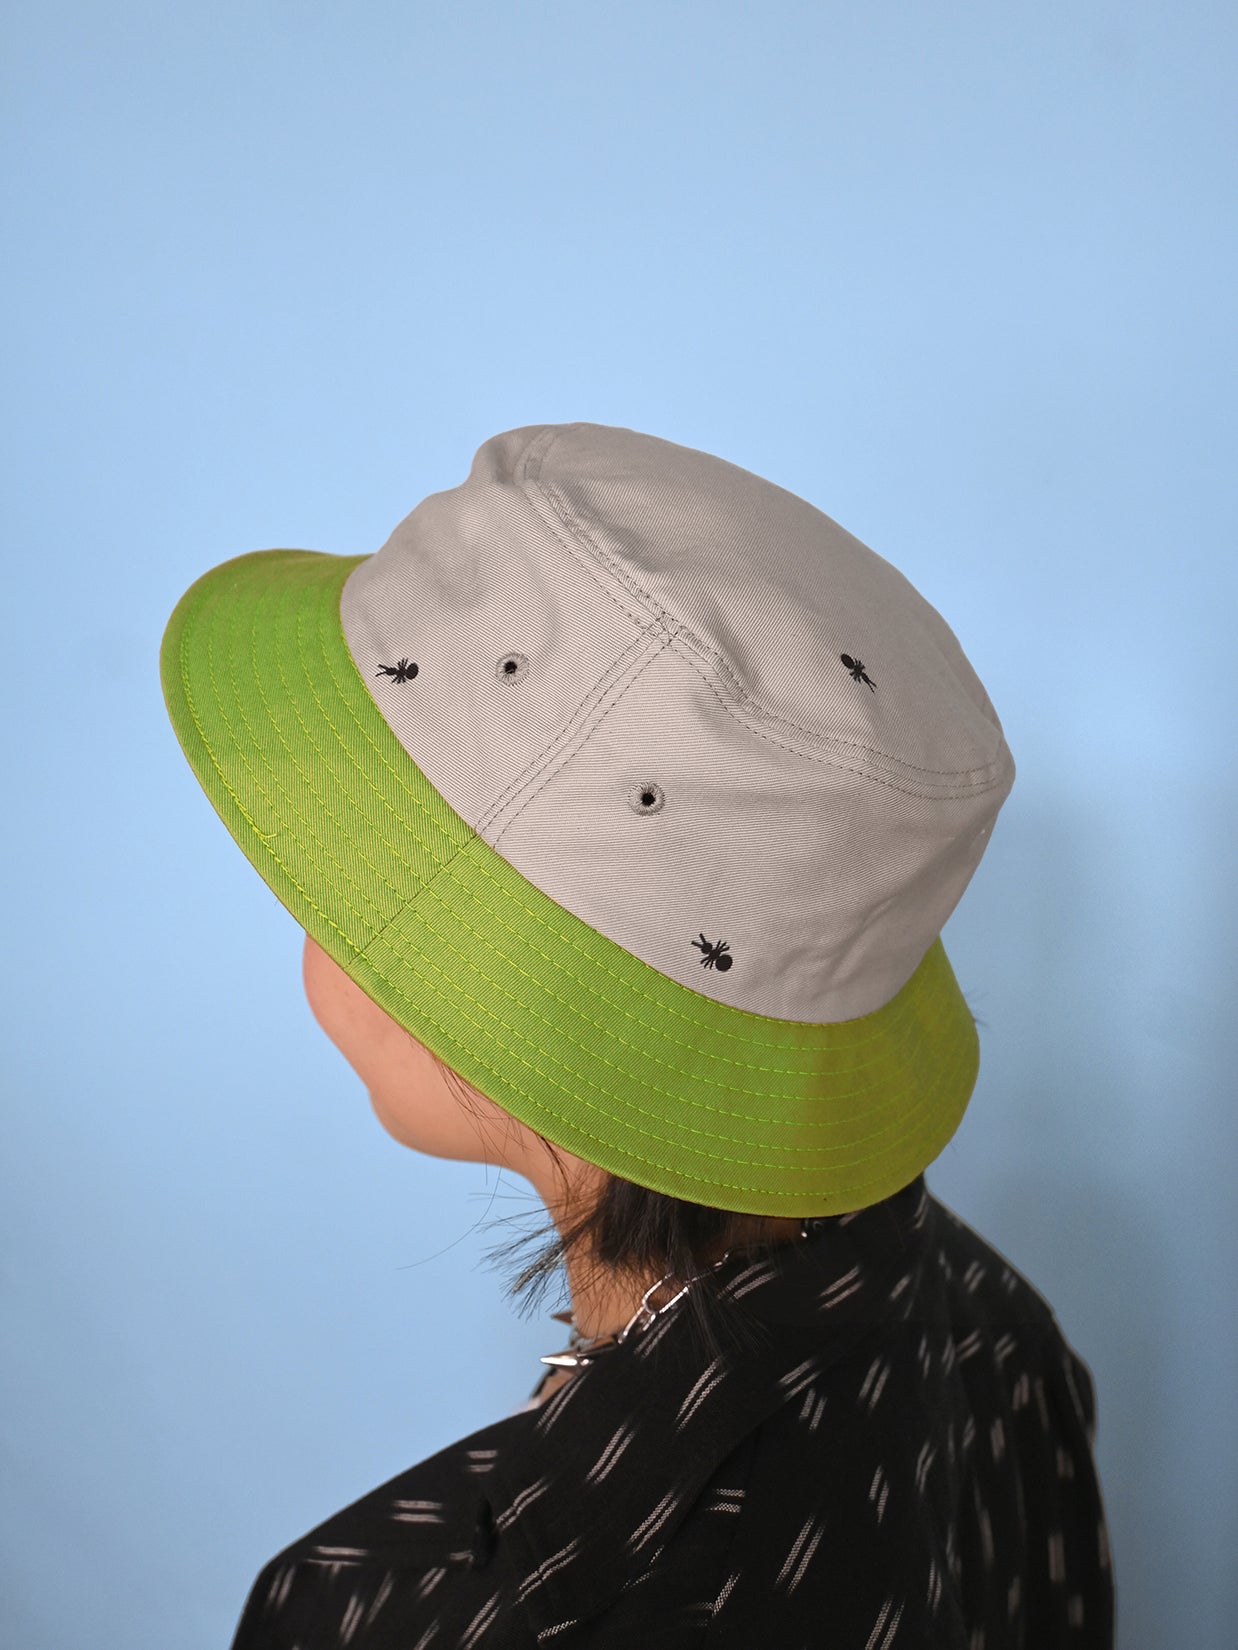 Natali Koromoto x HO HOS HOLE IN THE WALL brands "Ants on Your Hat"  print design bucket hat in Pearl Grey and Avocado Green dye colorway organic cotton fabric combo